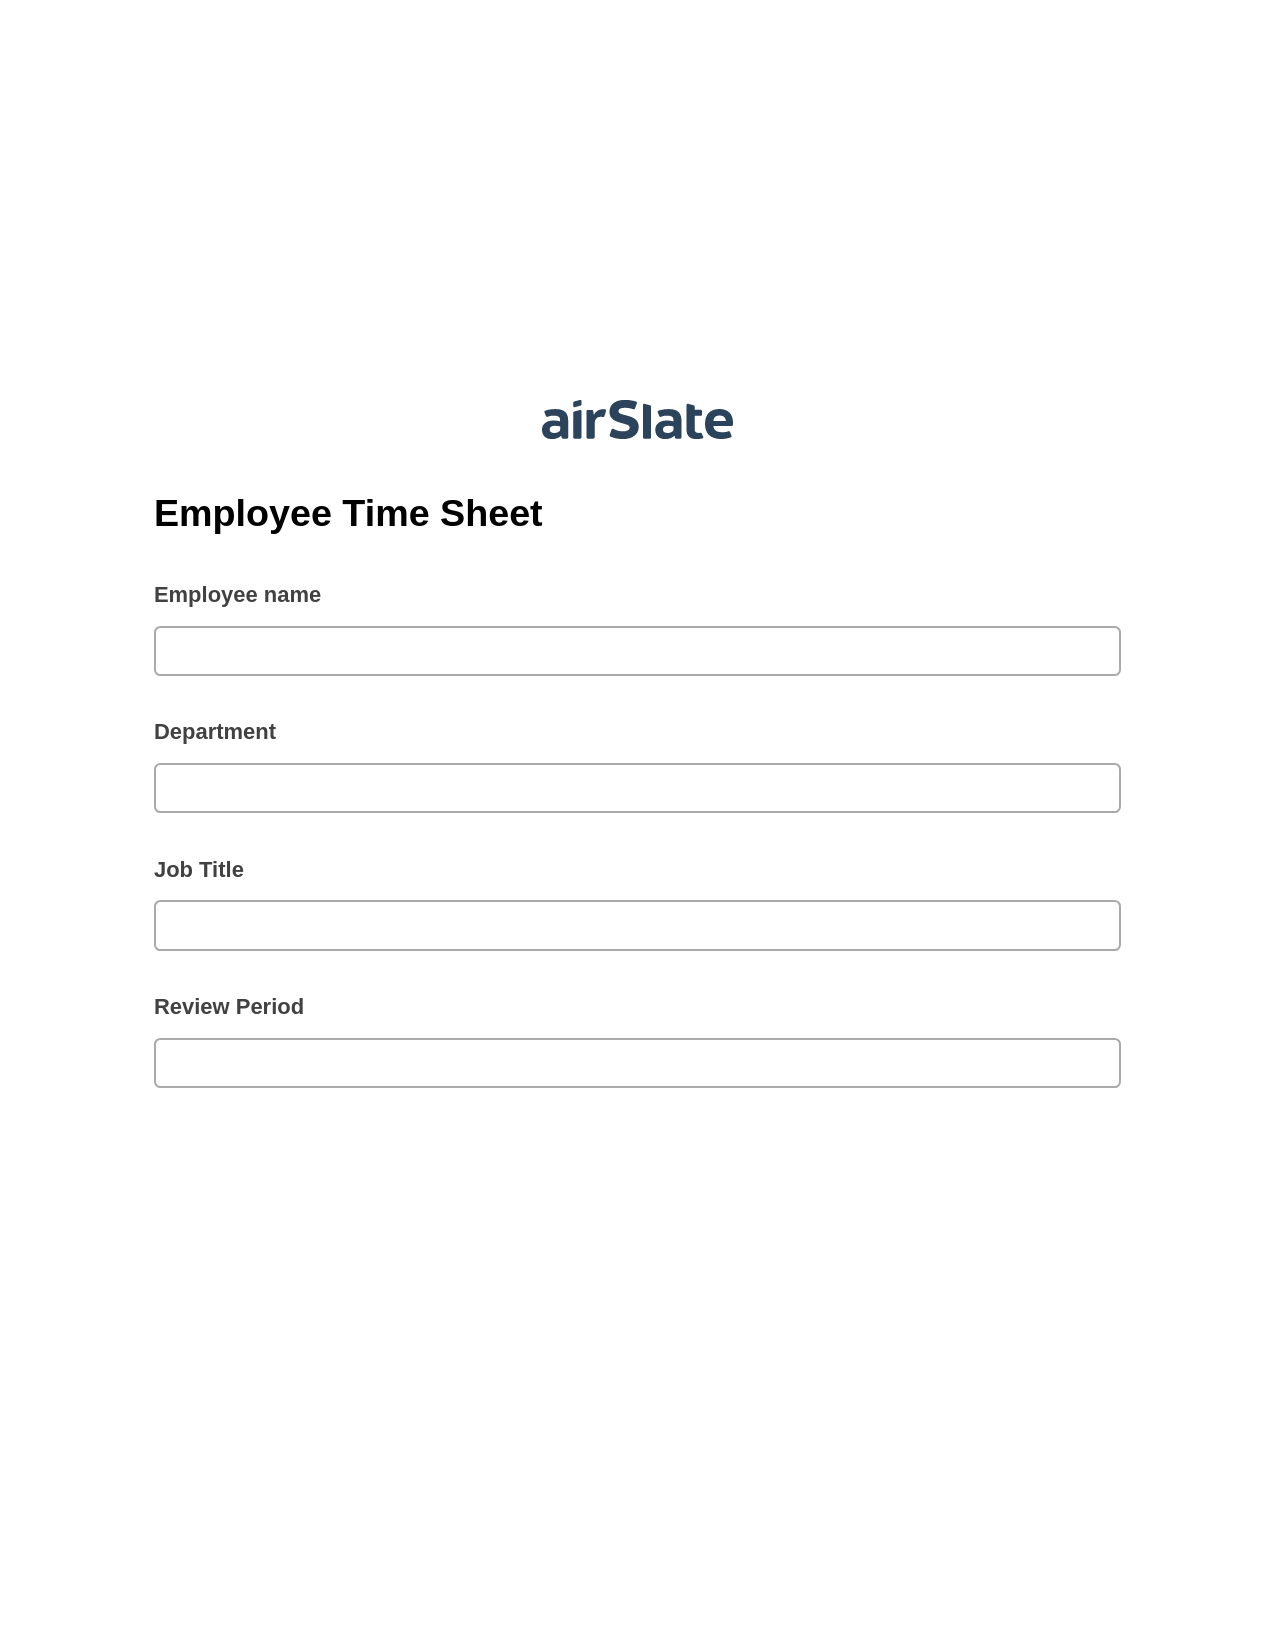 Multirole Employee Time Sheet Pre-fill Dropdowns from Excel Bot, Create Salesforce Records Bot, Archive to SharePoint Folder Bot